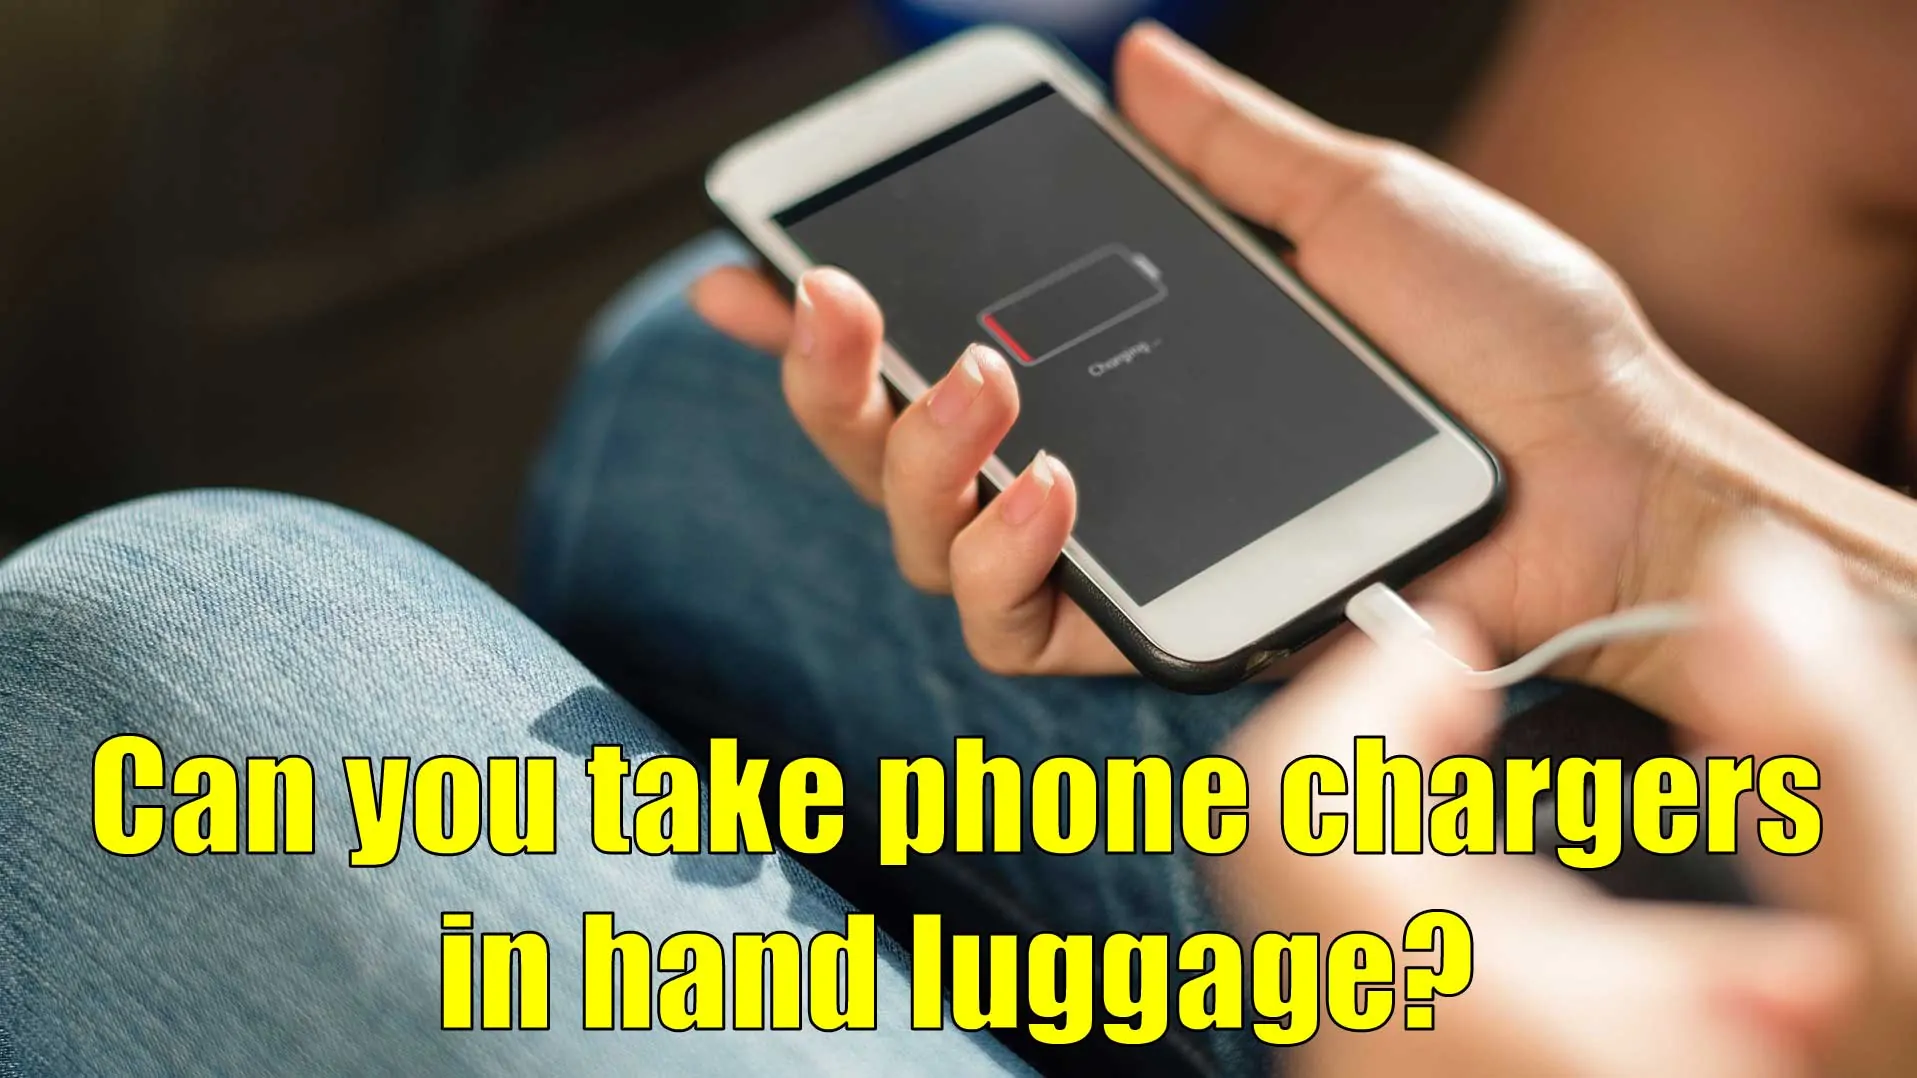 Do Phone Chargers Go in Hand Luggage or Suitcase?